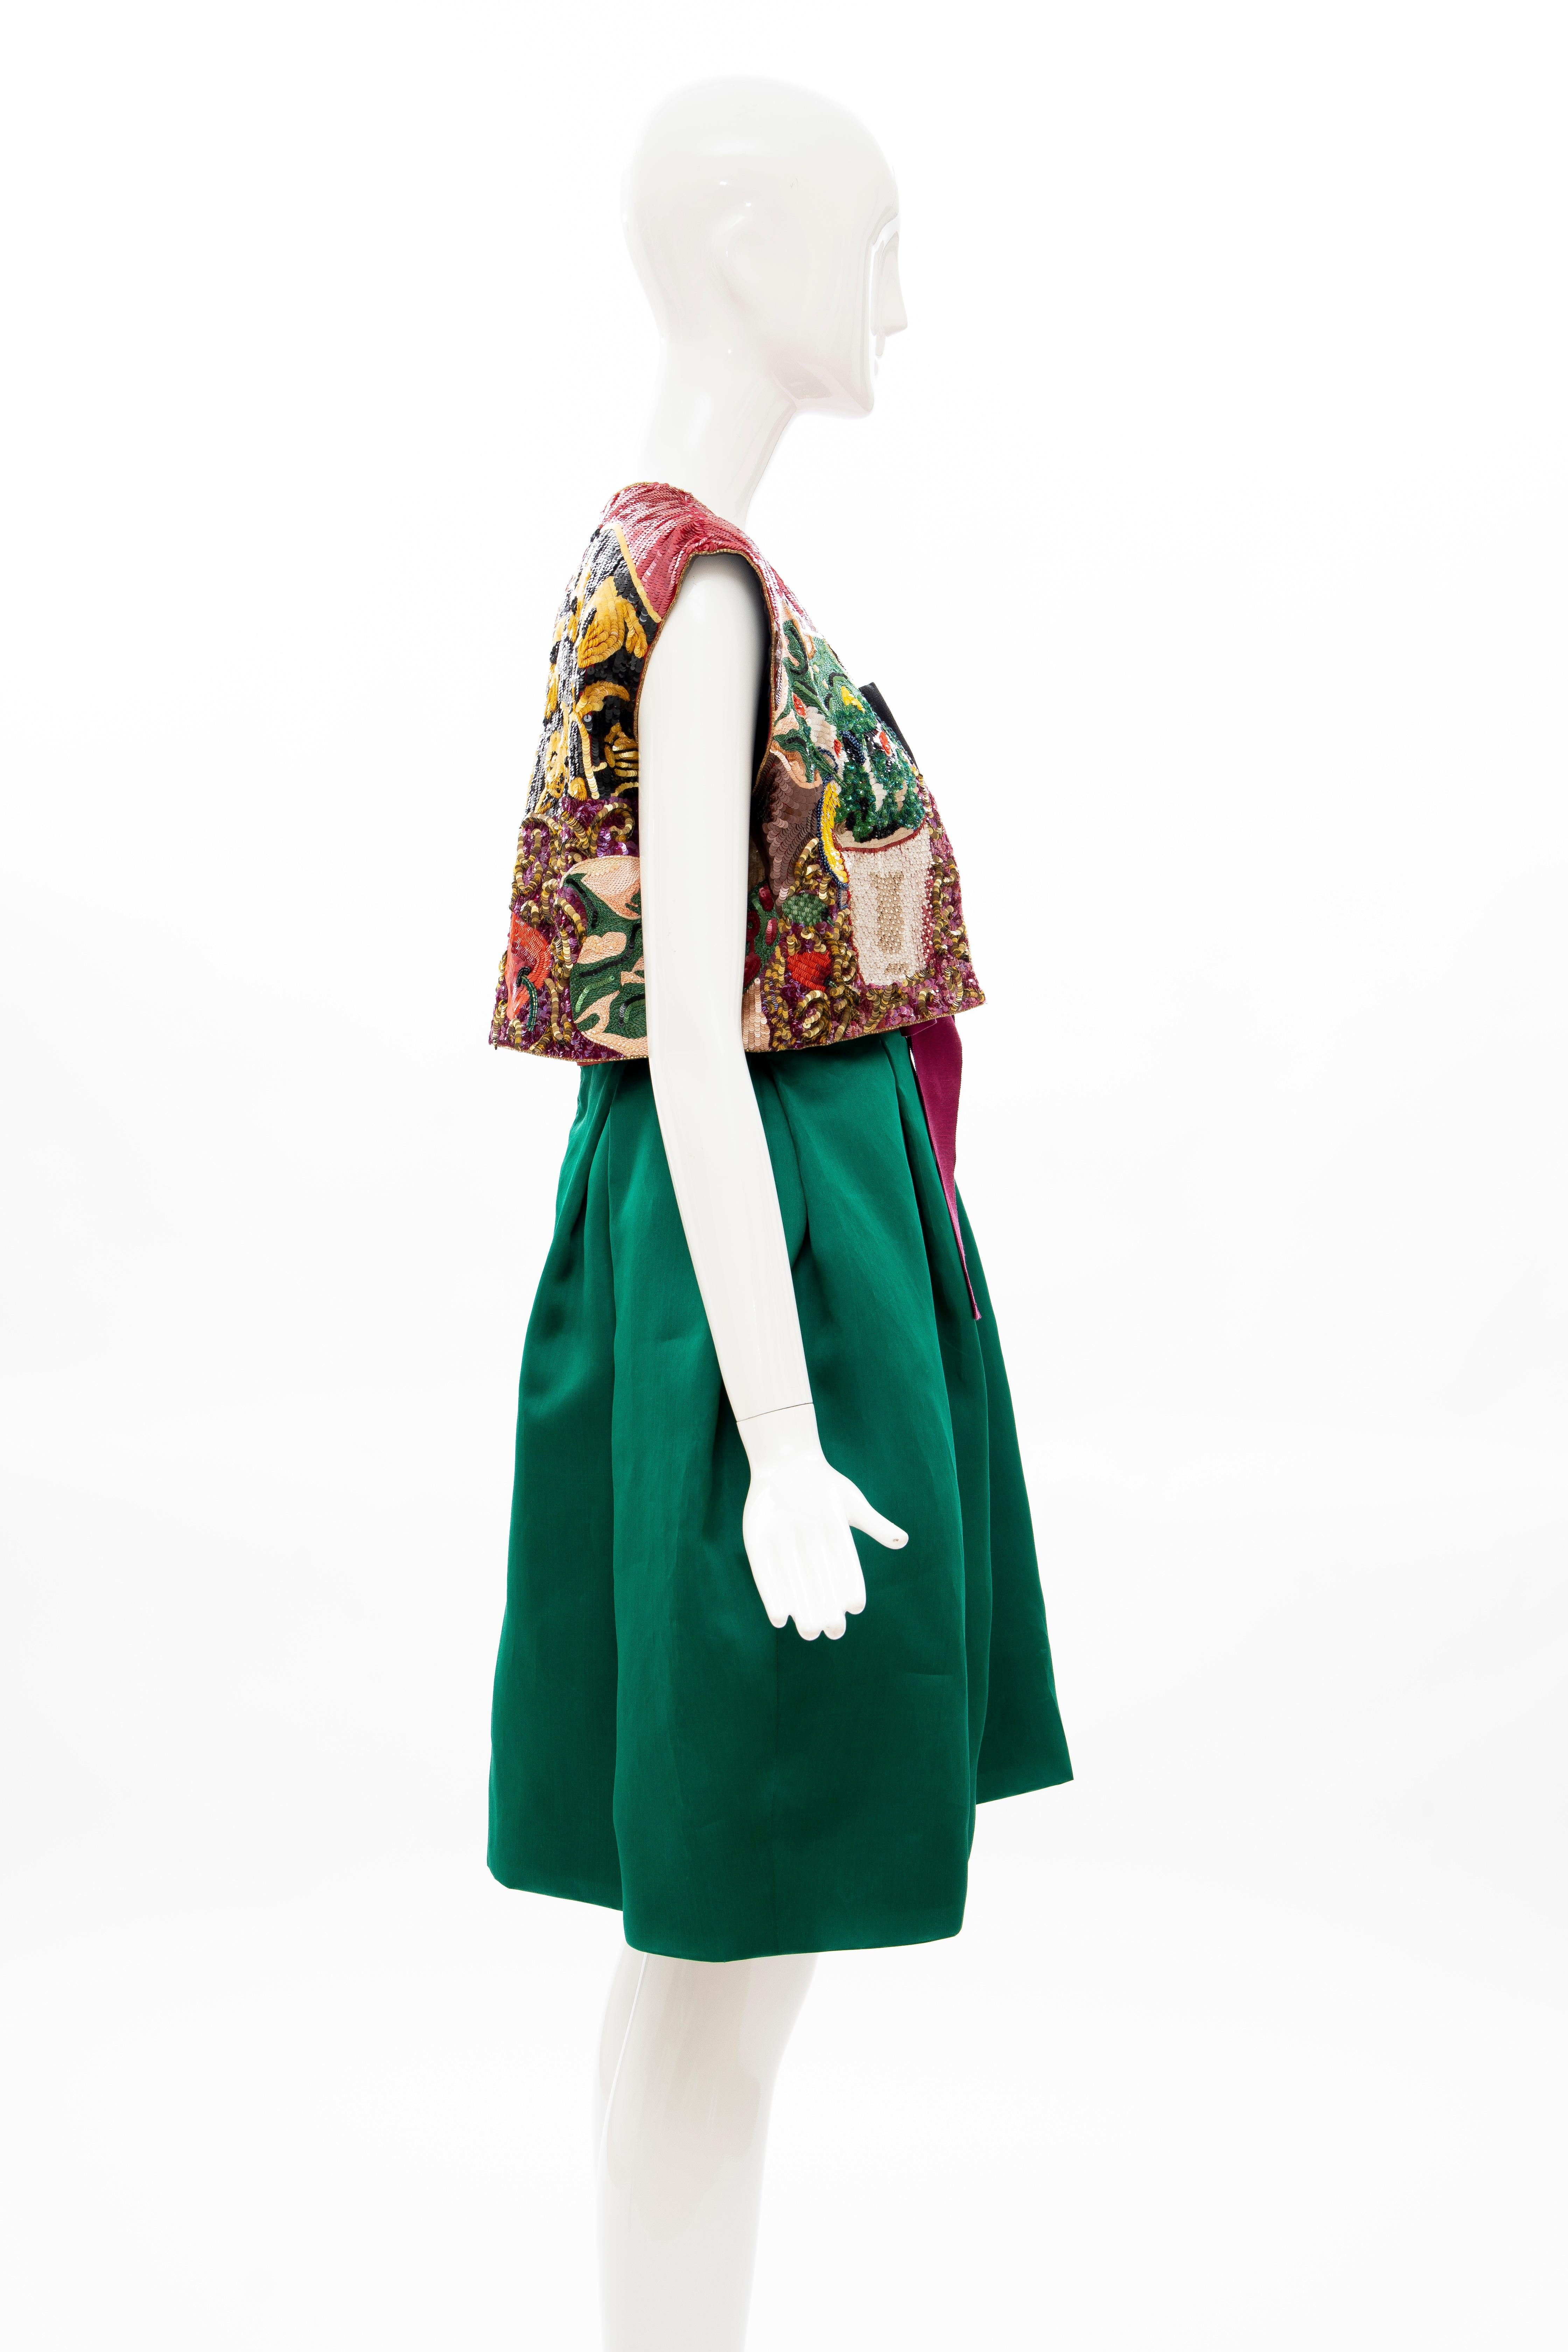 Bill Blass Matisse Inspired Embroidered Sequined Dress Ensemble, Spring 1988 For Sale 2